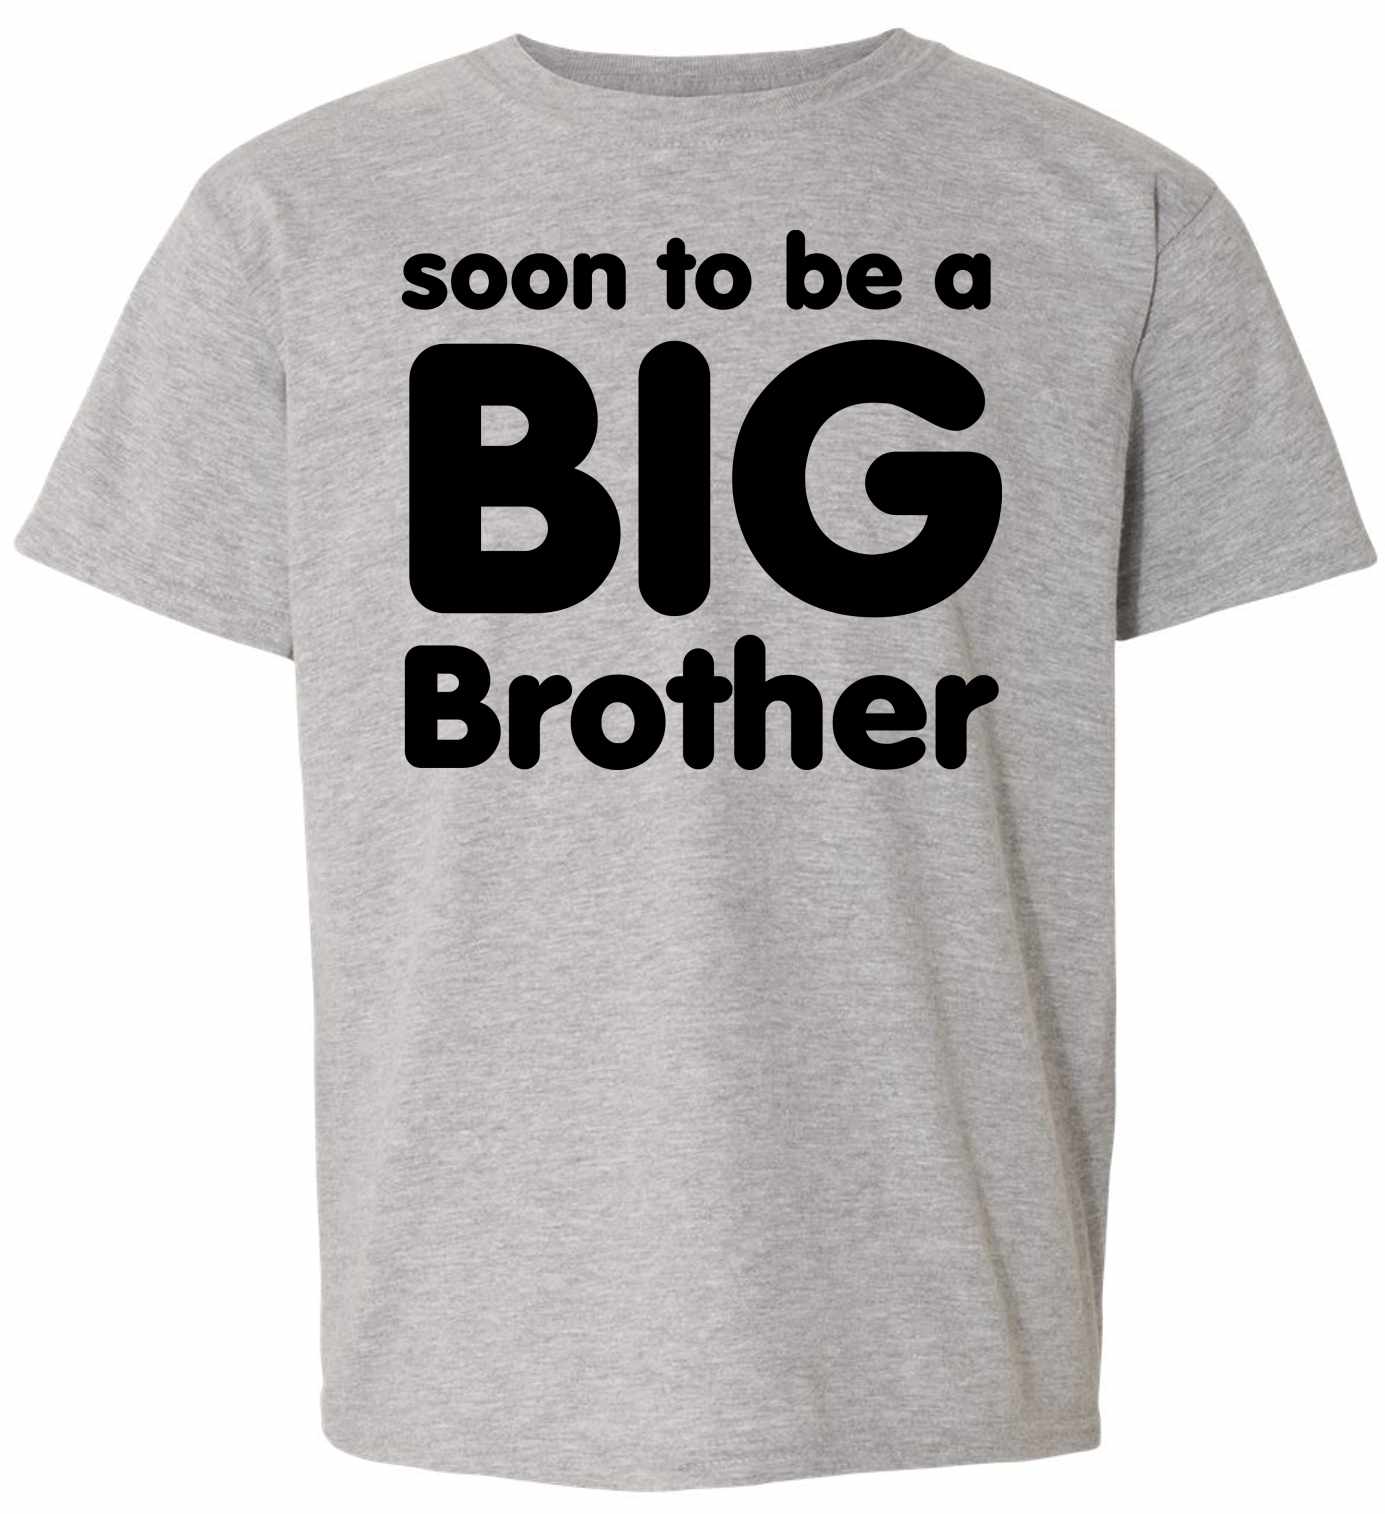 Soon to be a BIG BROTHER Youth T-Shirt (#590-201)